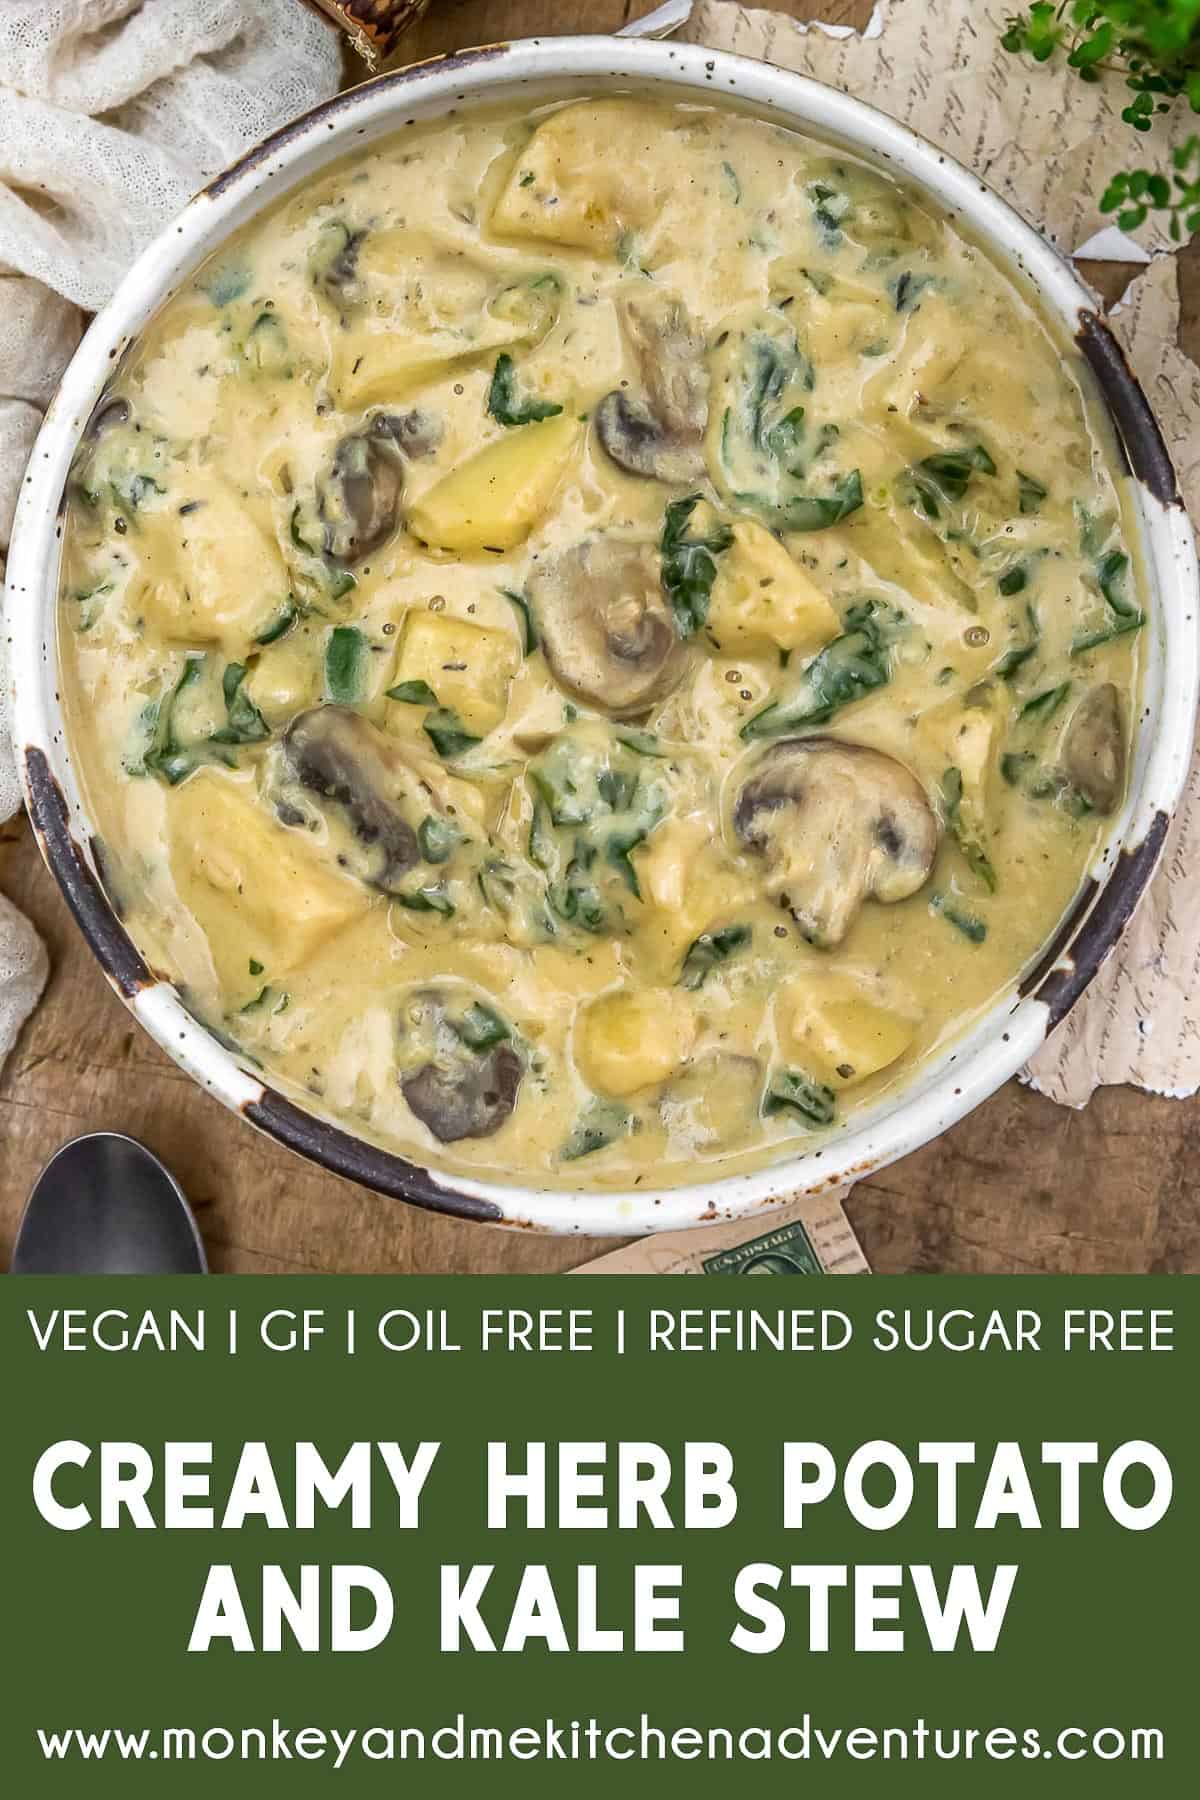 Creamy Herb Potato and Kale Stew with text description